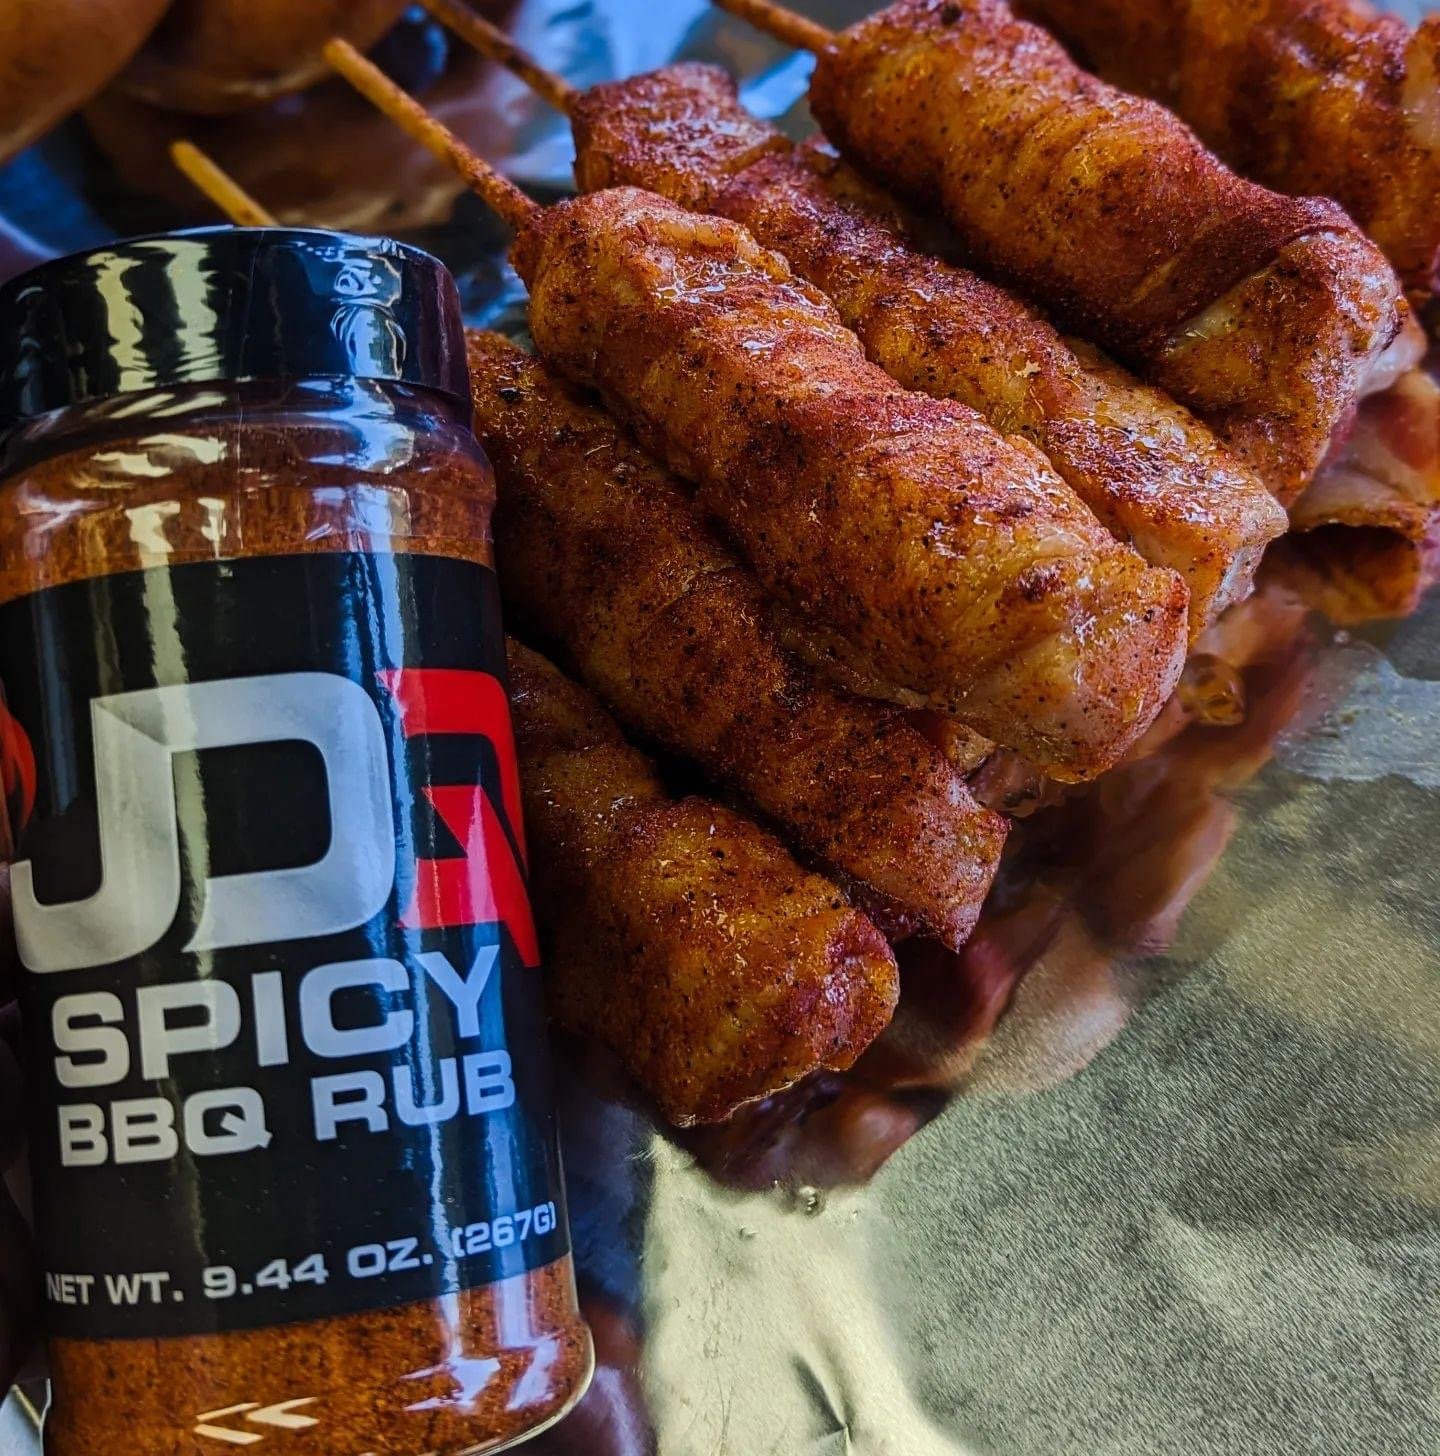 25+ BBQ, Smoke Lover, and Grill Gift Ideas - Our Sweetly Spiced Life